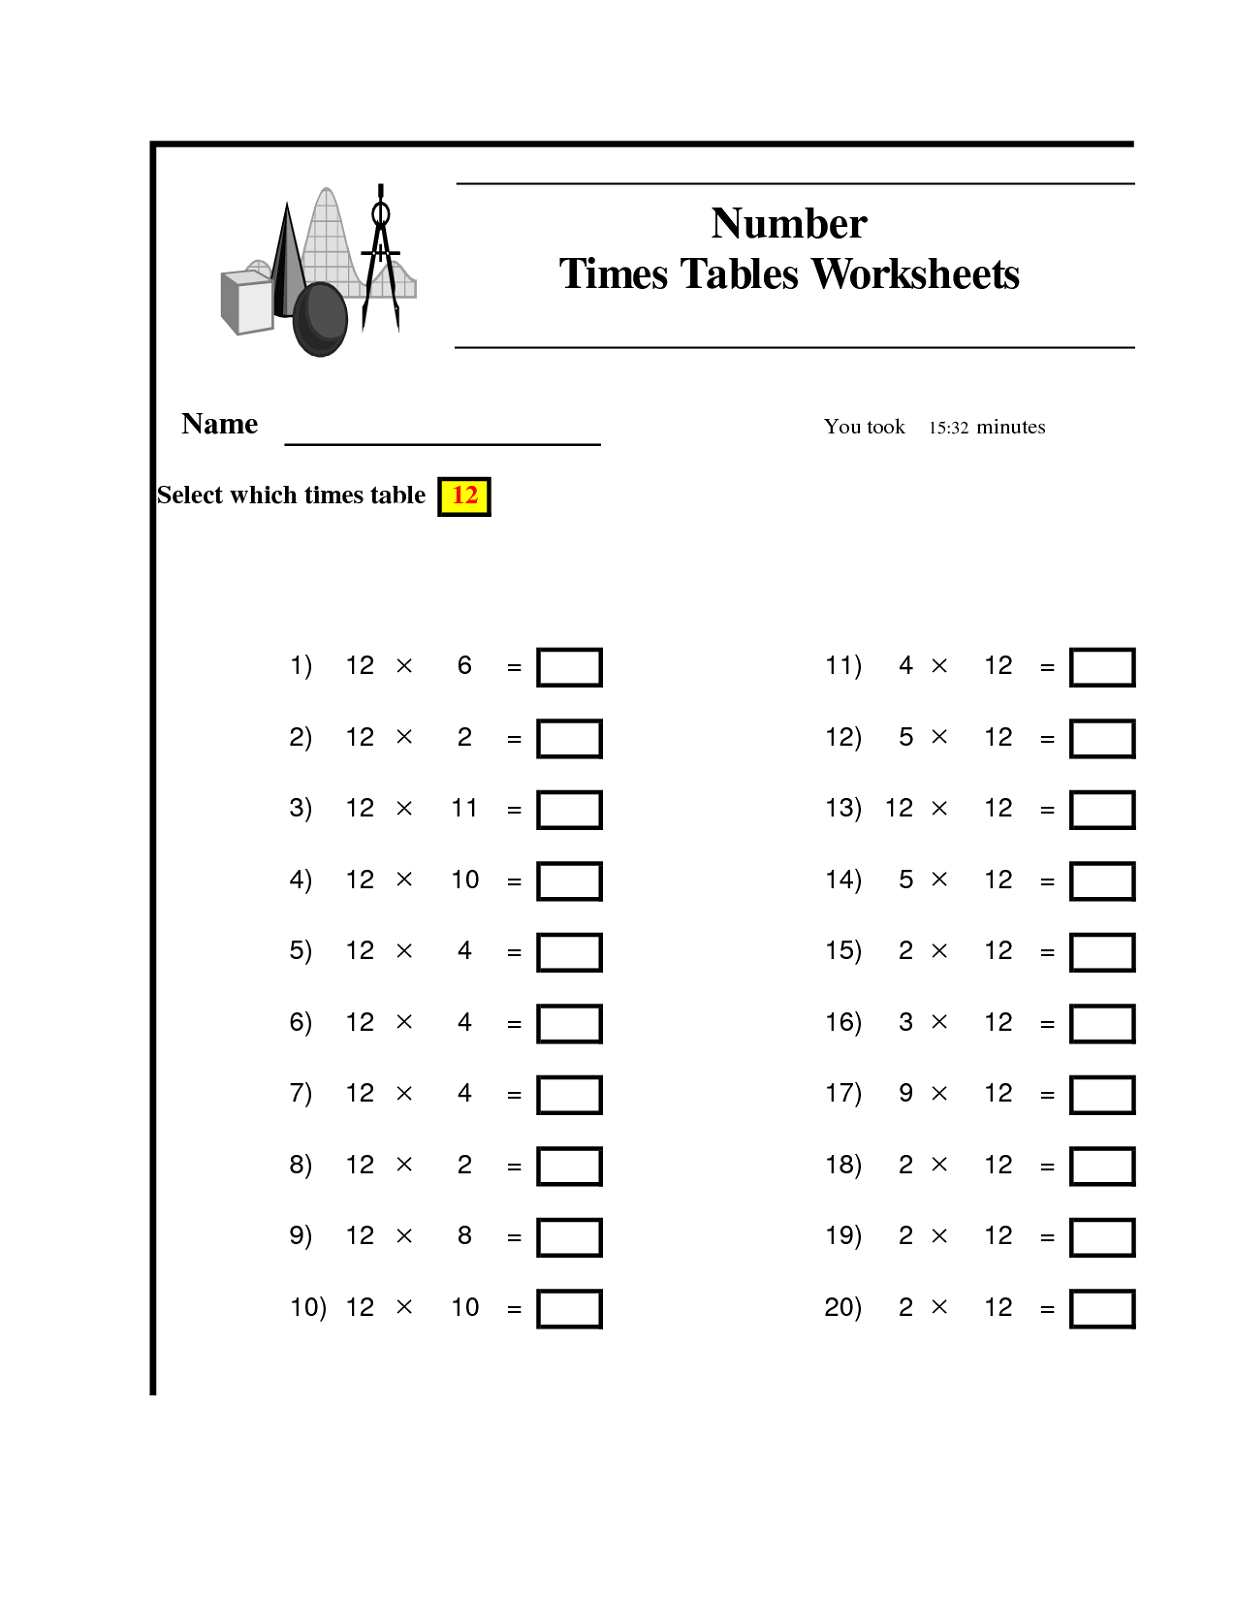 12 times table worksheet to learn